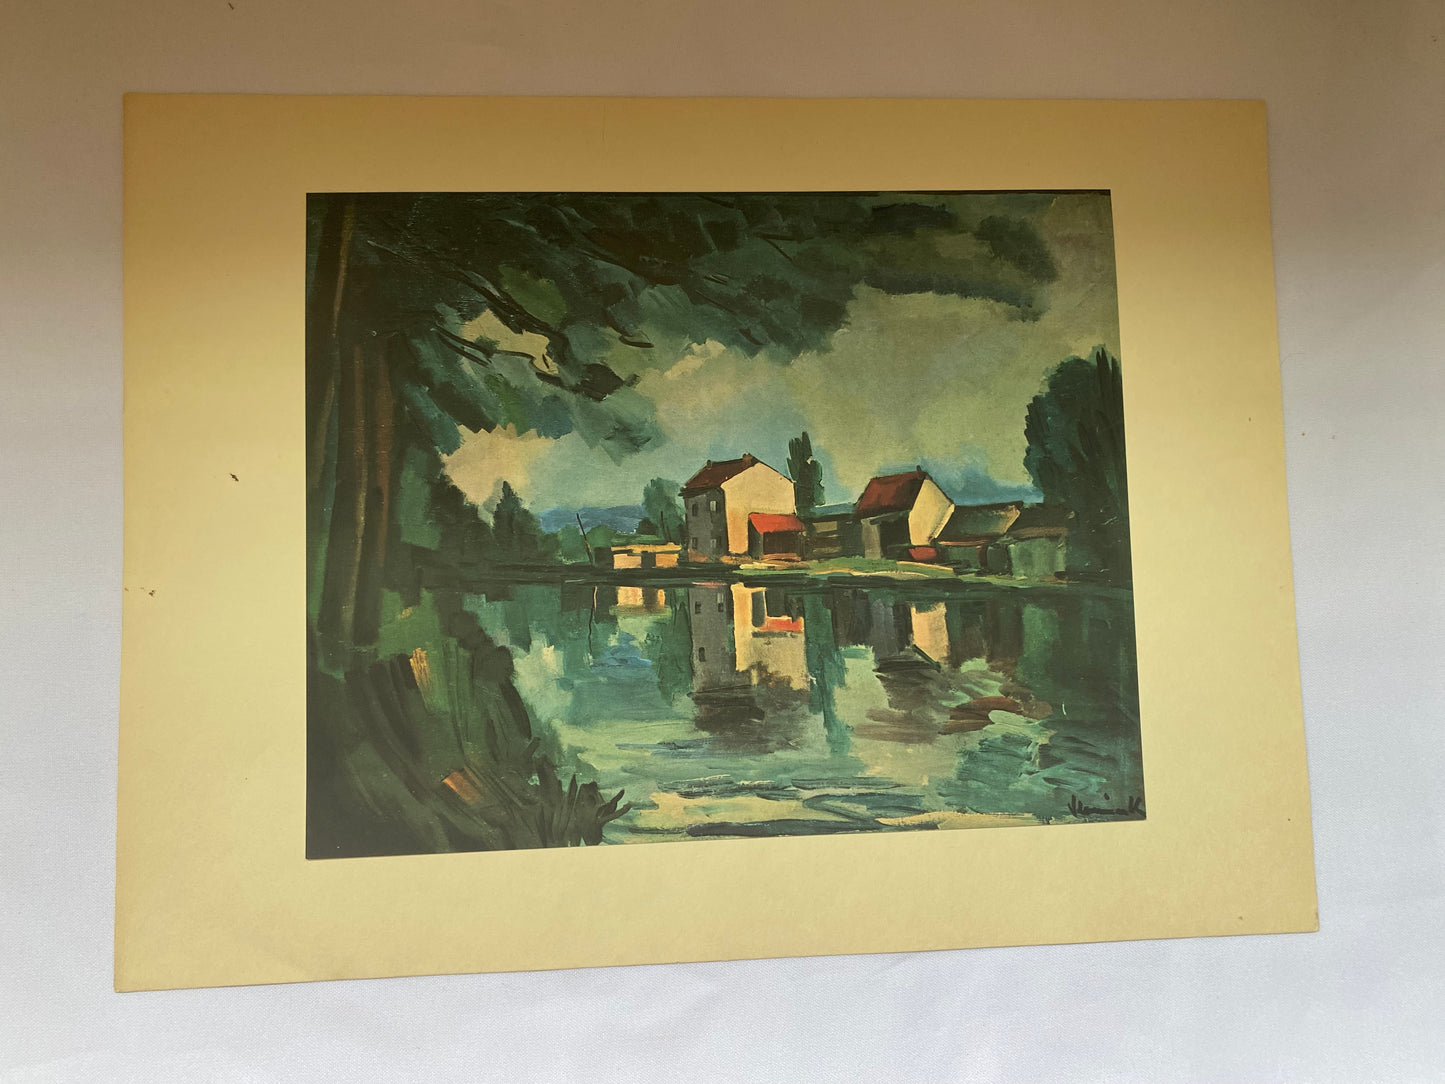 Rare lithograph after painting "River Bank" by Maurice Vlaminck